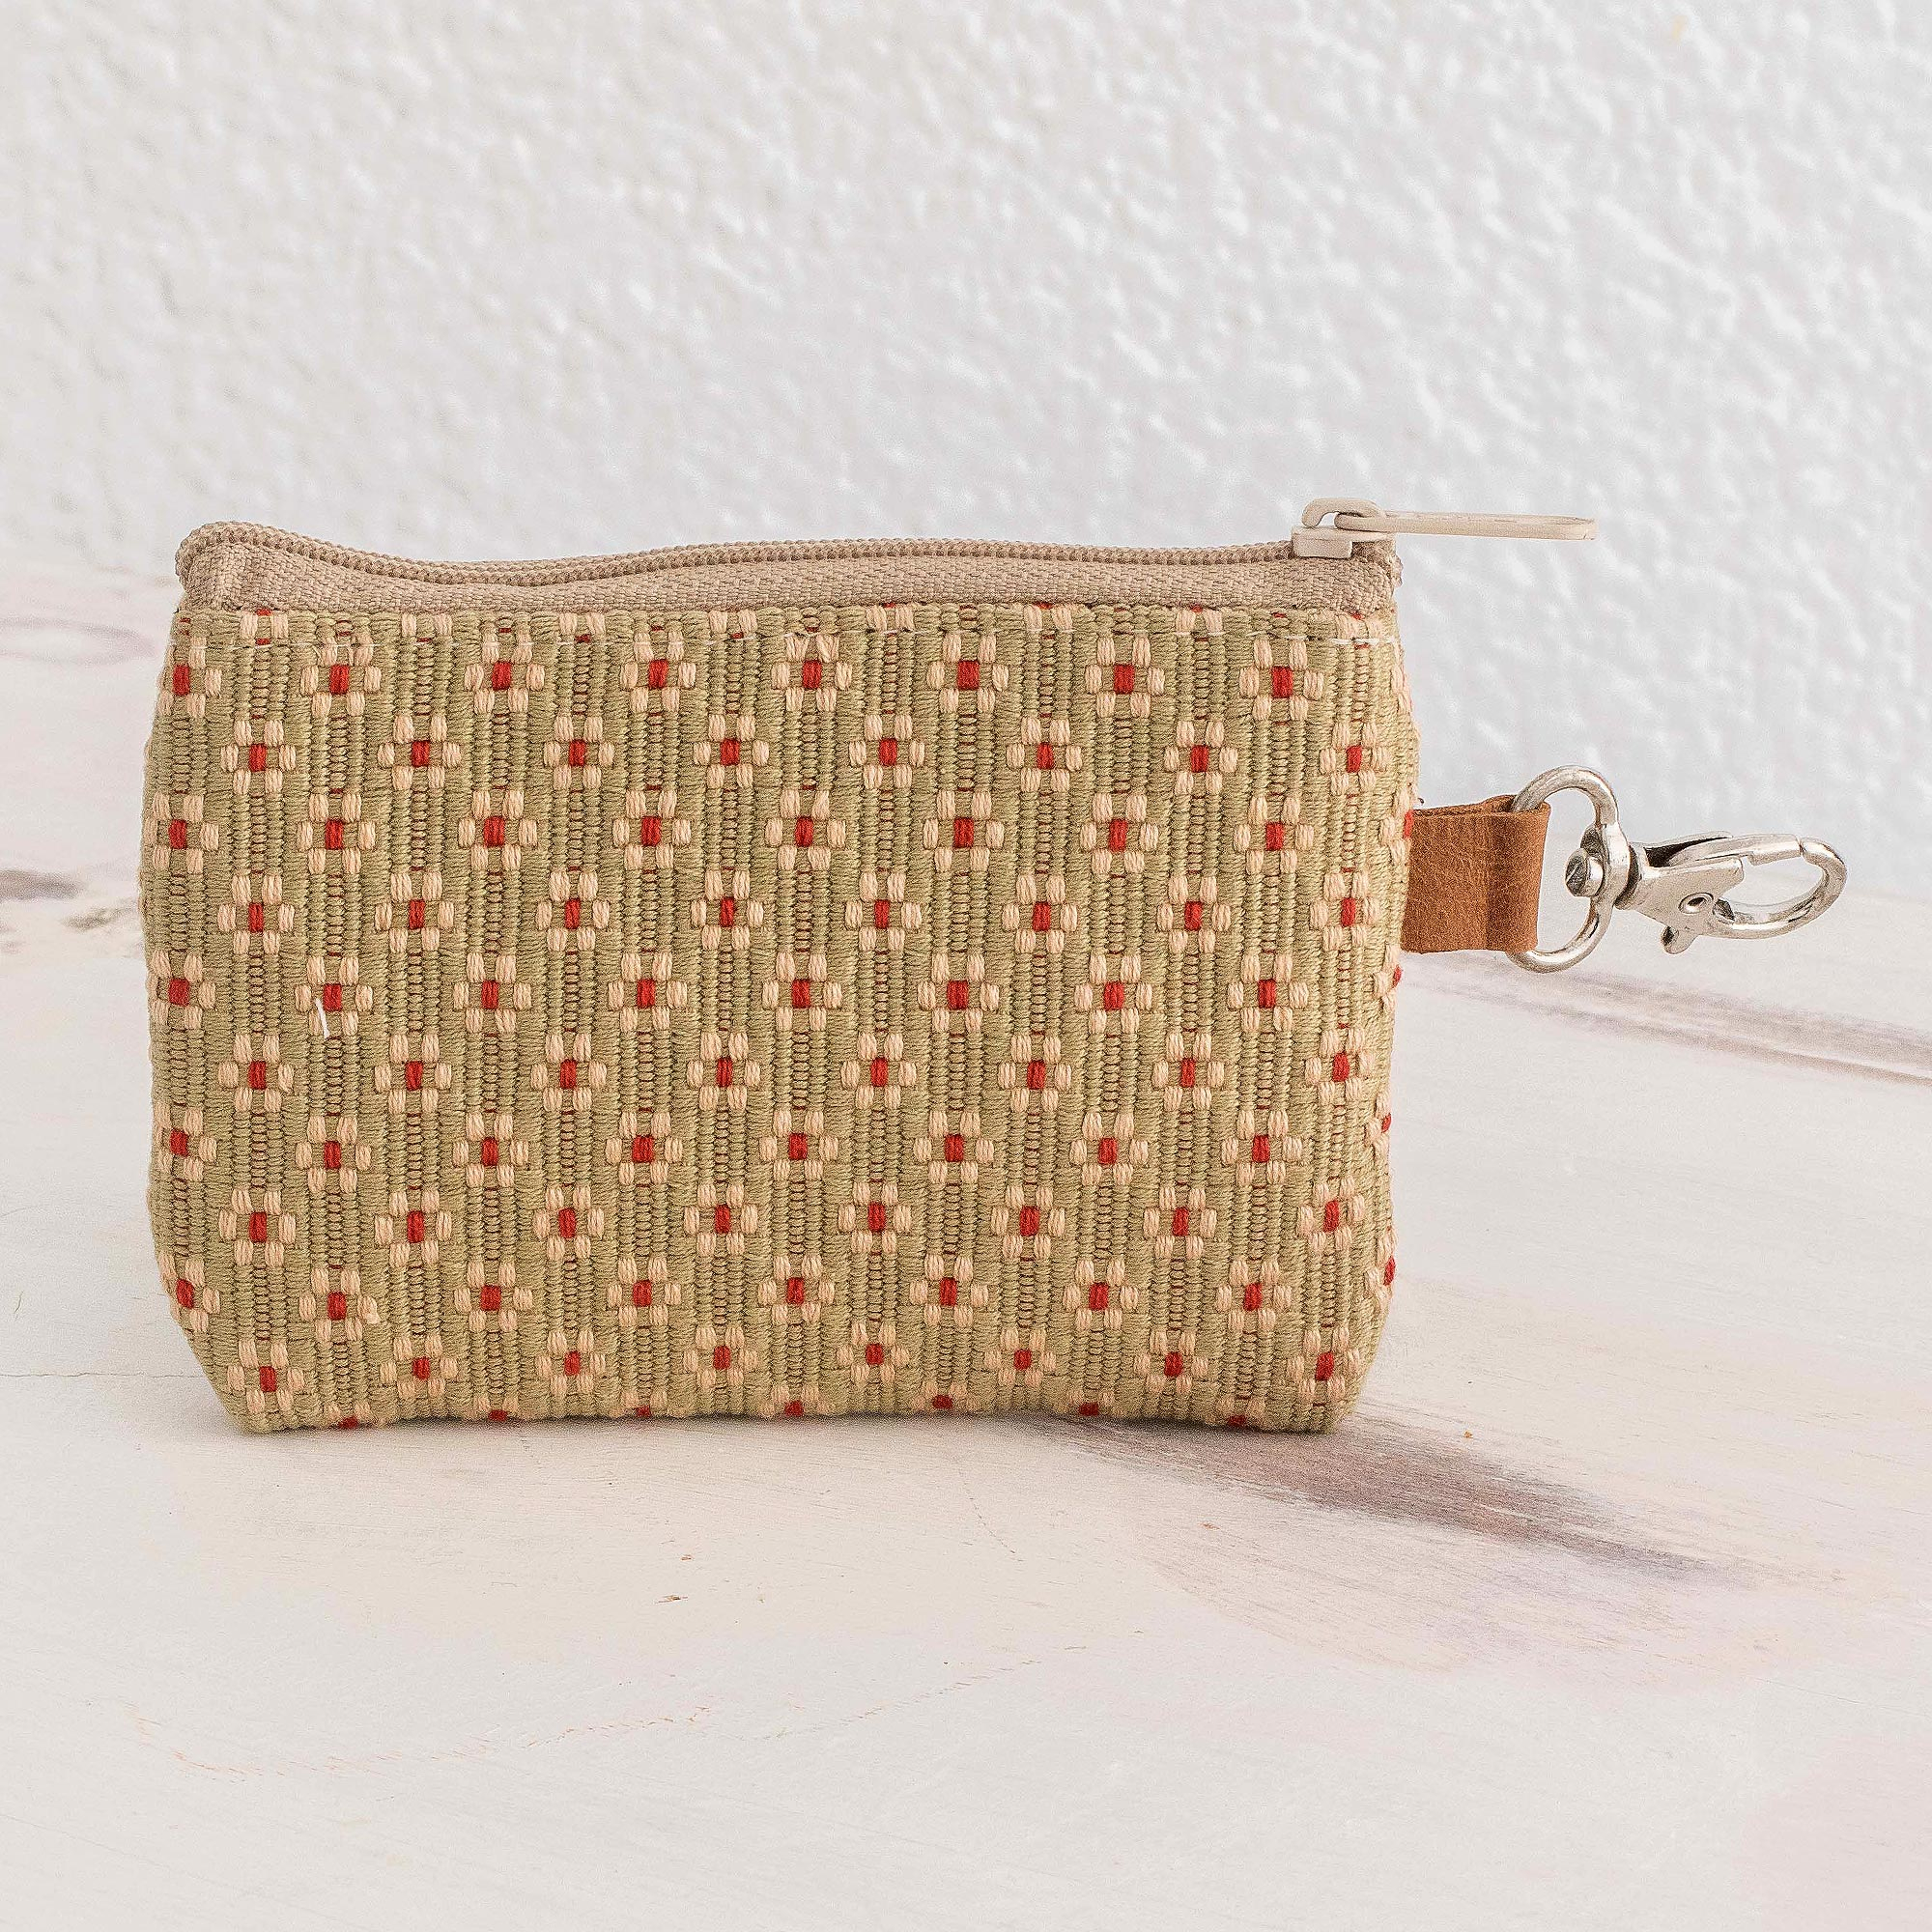 Strawberry Fabric Coin Purse in Blue | 144collection